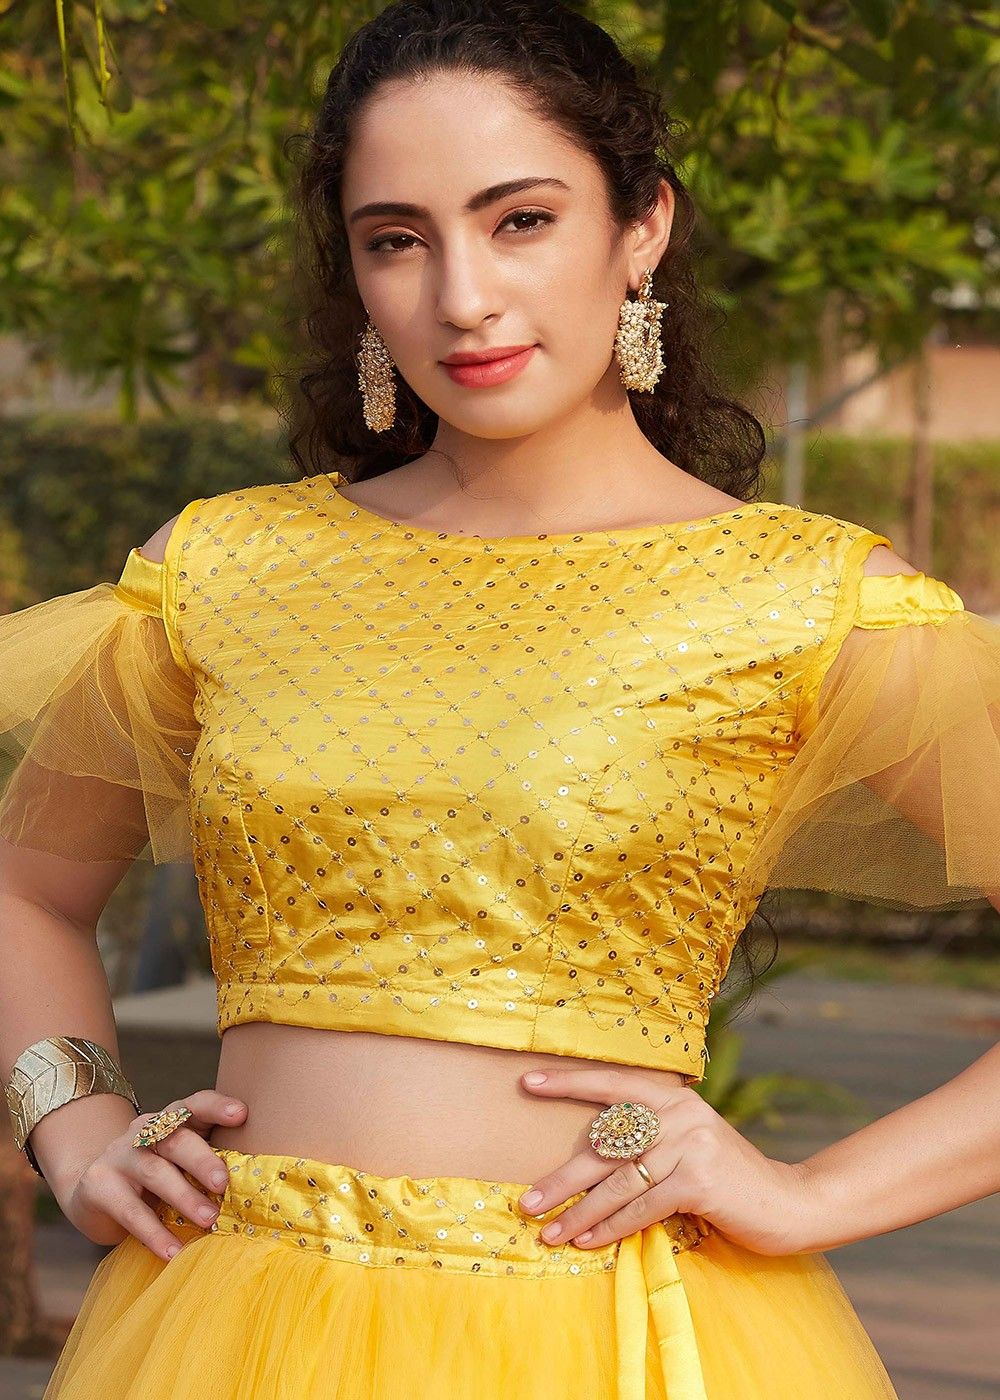 Buy BownBee Girls Cotton Block Print Cold Shoulder Lehenga Choli Indian  Traditional Ethnic Dress for Kids with Half Sleeve, Round Neck, Dresses for  Baby Girl, (Yellow, 1-2 Yrs) at Amazon.in